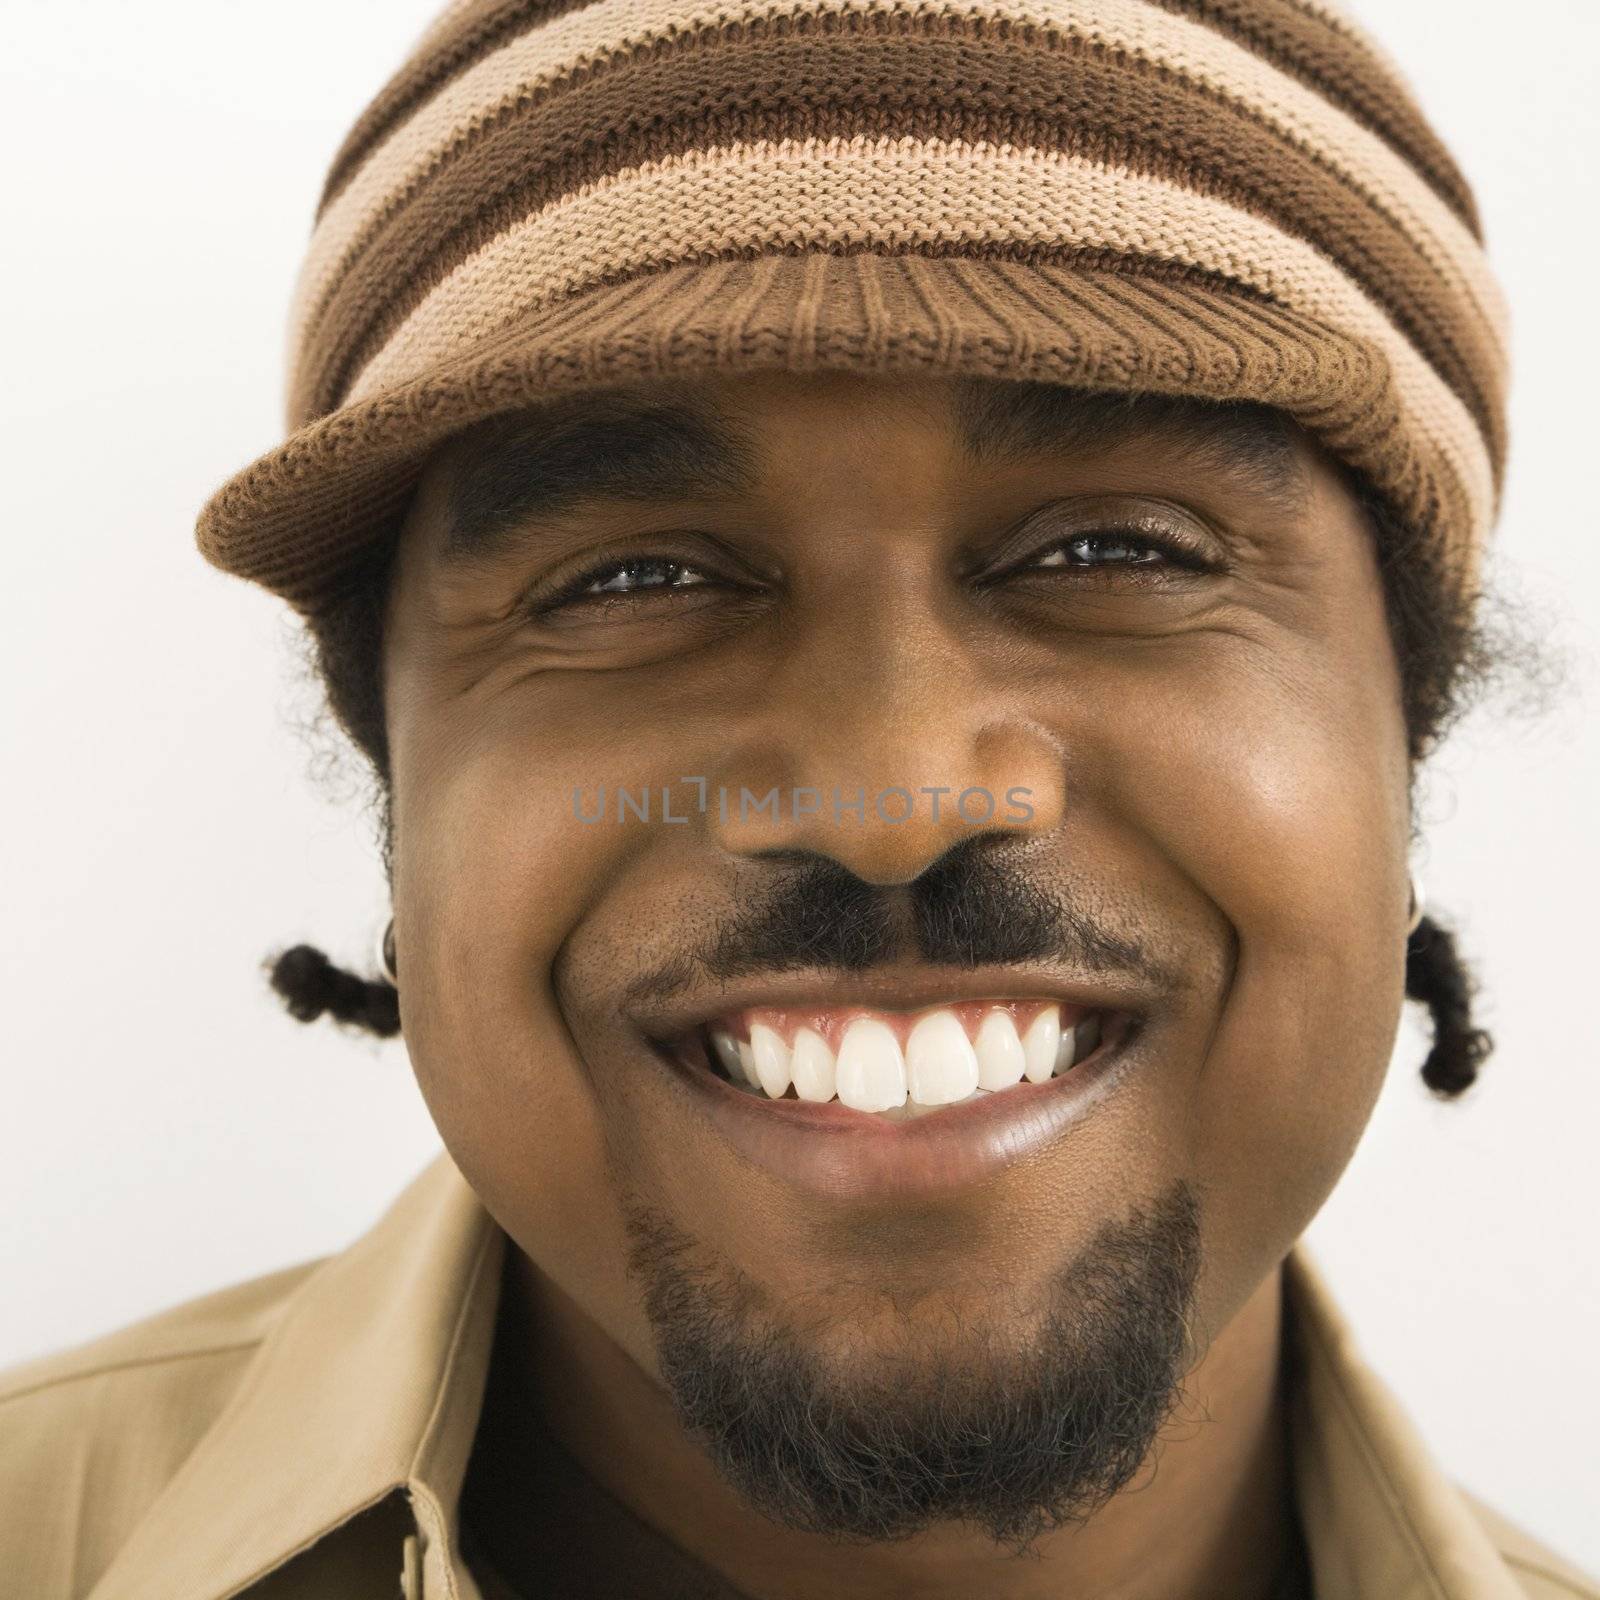 Close up of African-American mid-adult man wearing knit hat with brim smiling at viewer.